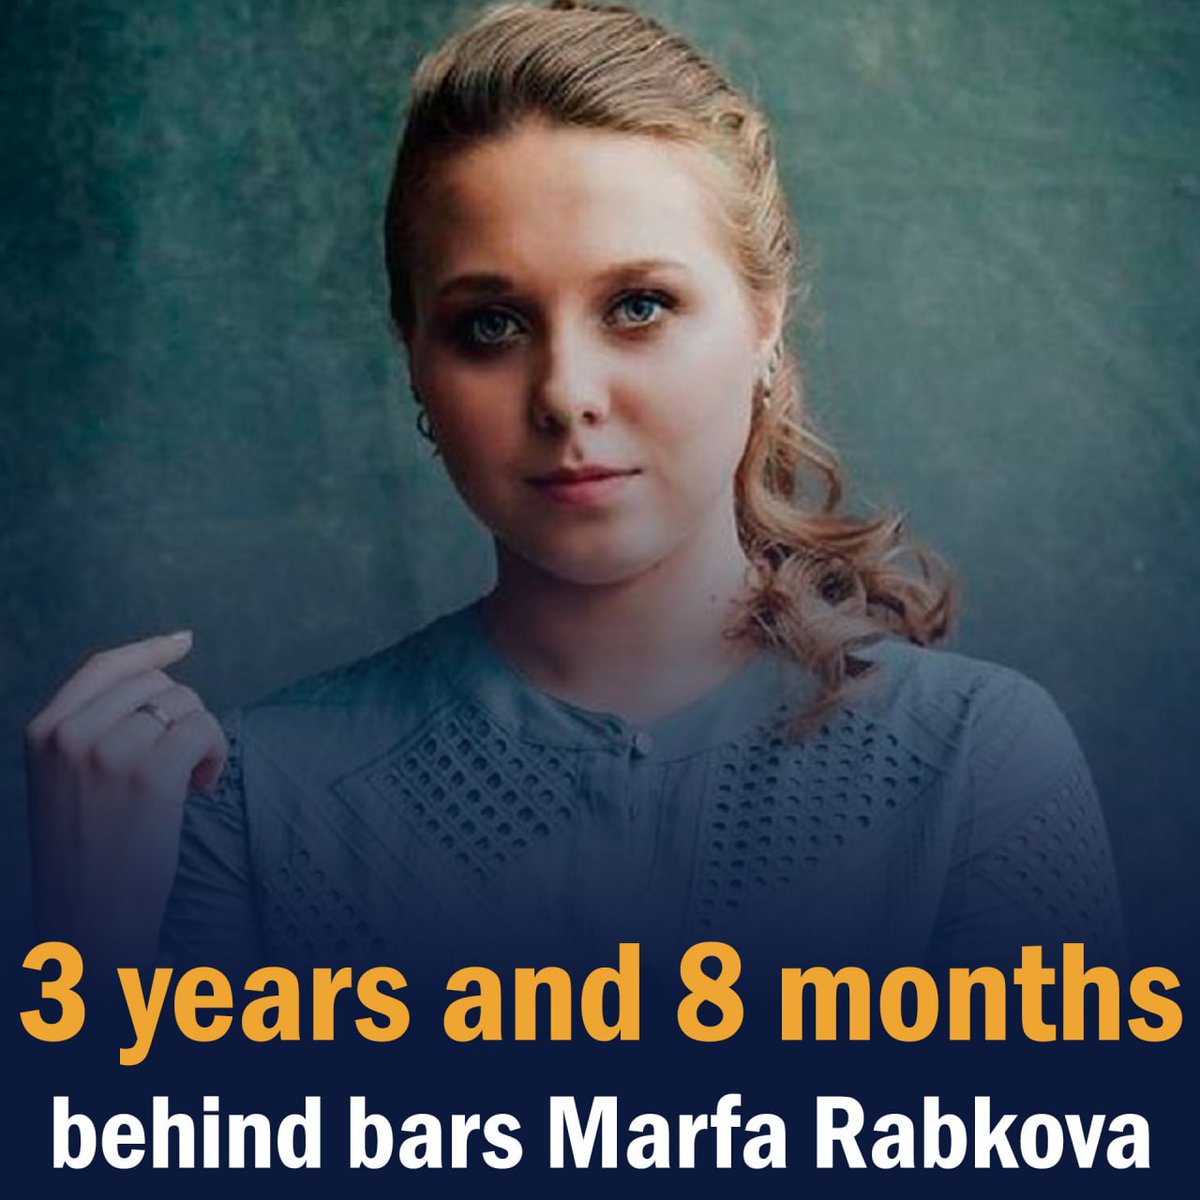 💔 It's now 3 years and 8 months since @viasna96 #HumanRightsDefender Marfa Rabkova was separated from her family and friends. She has been sentenced to almost 15 years in prison for her peaceful activities. Marfa needs your support, write to her ⬇️ 💌 bit.ly/3PIOcjz